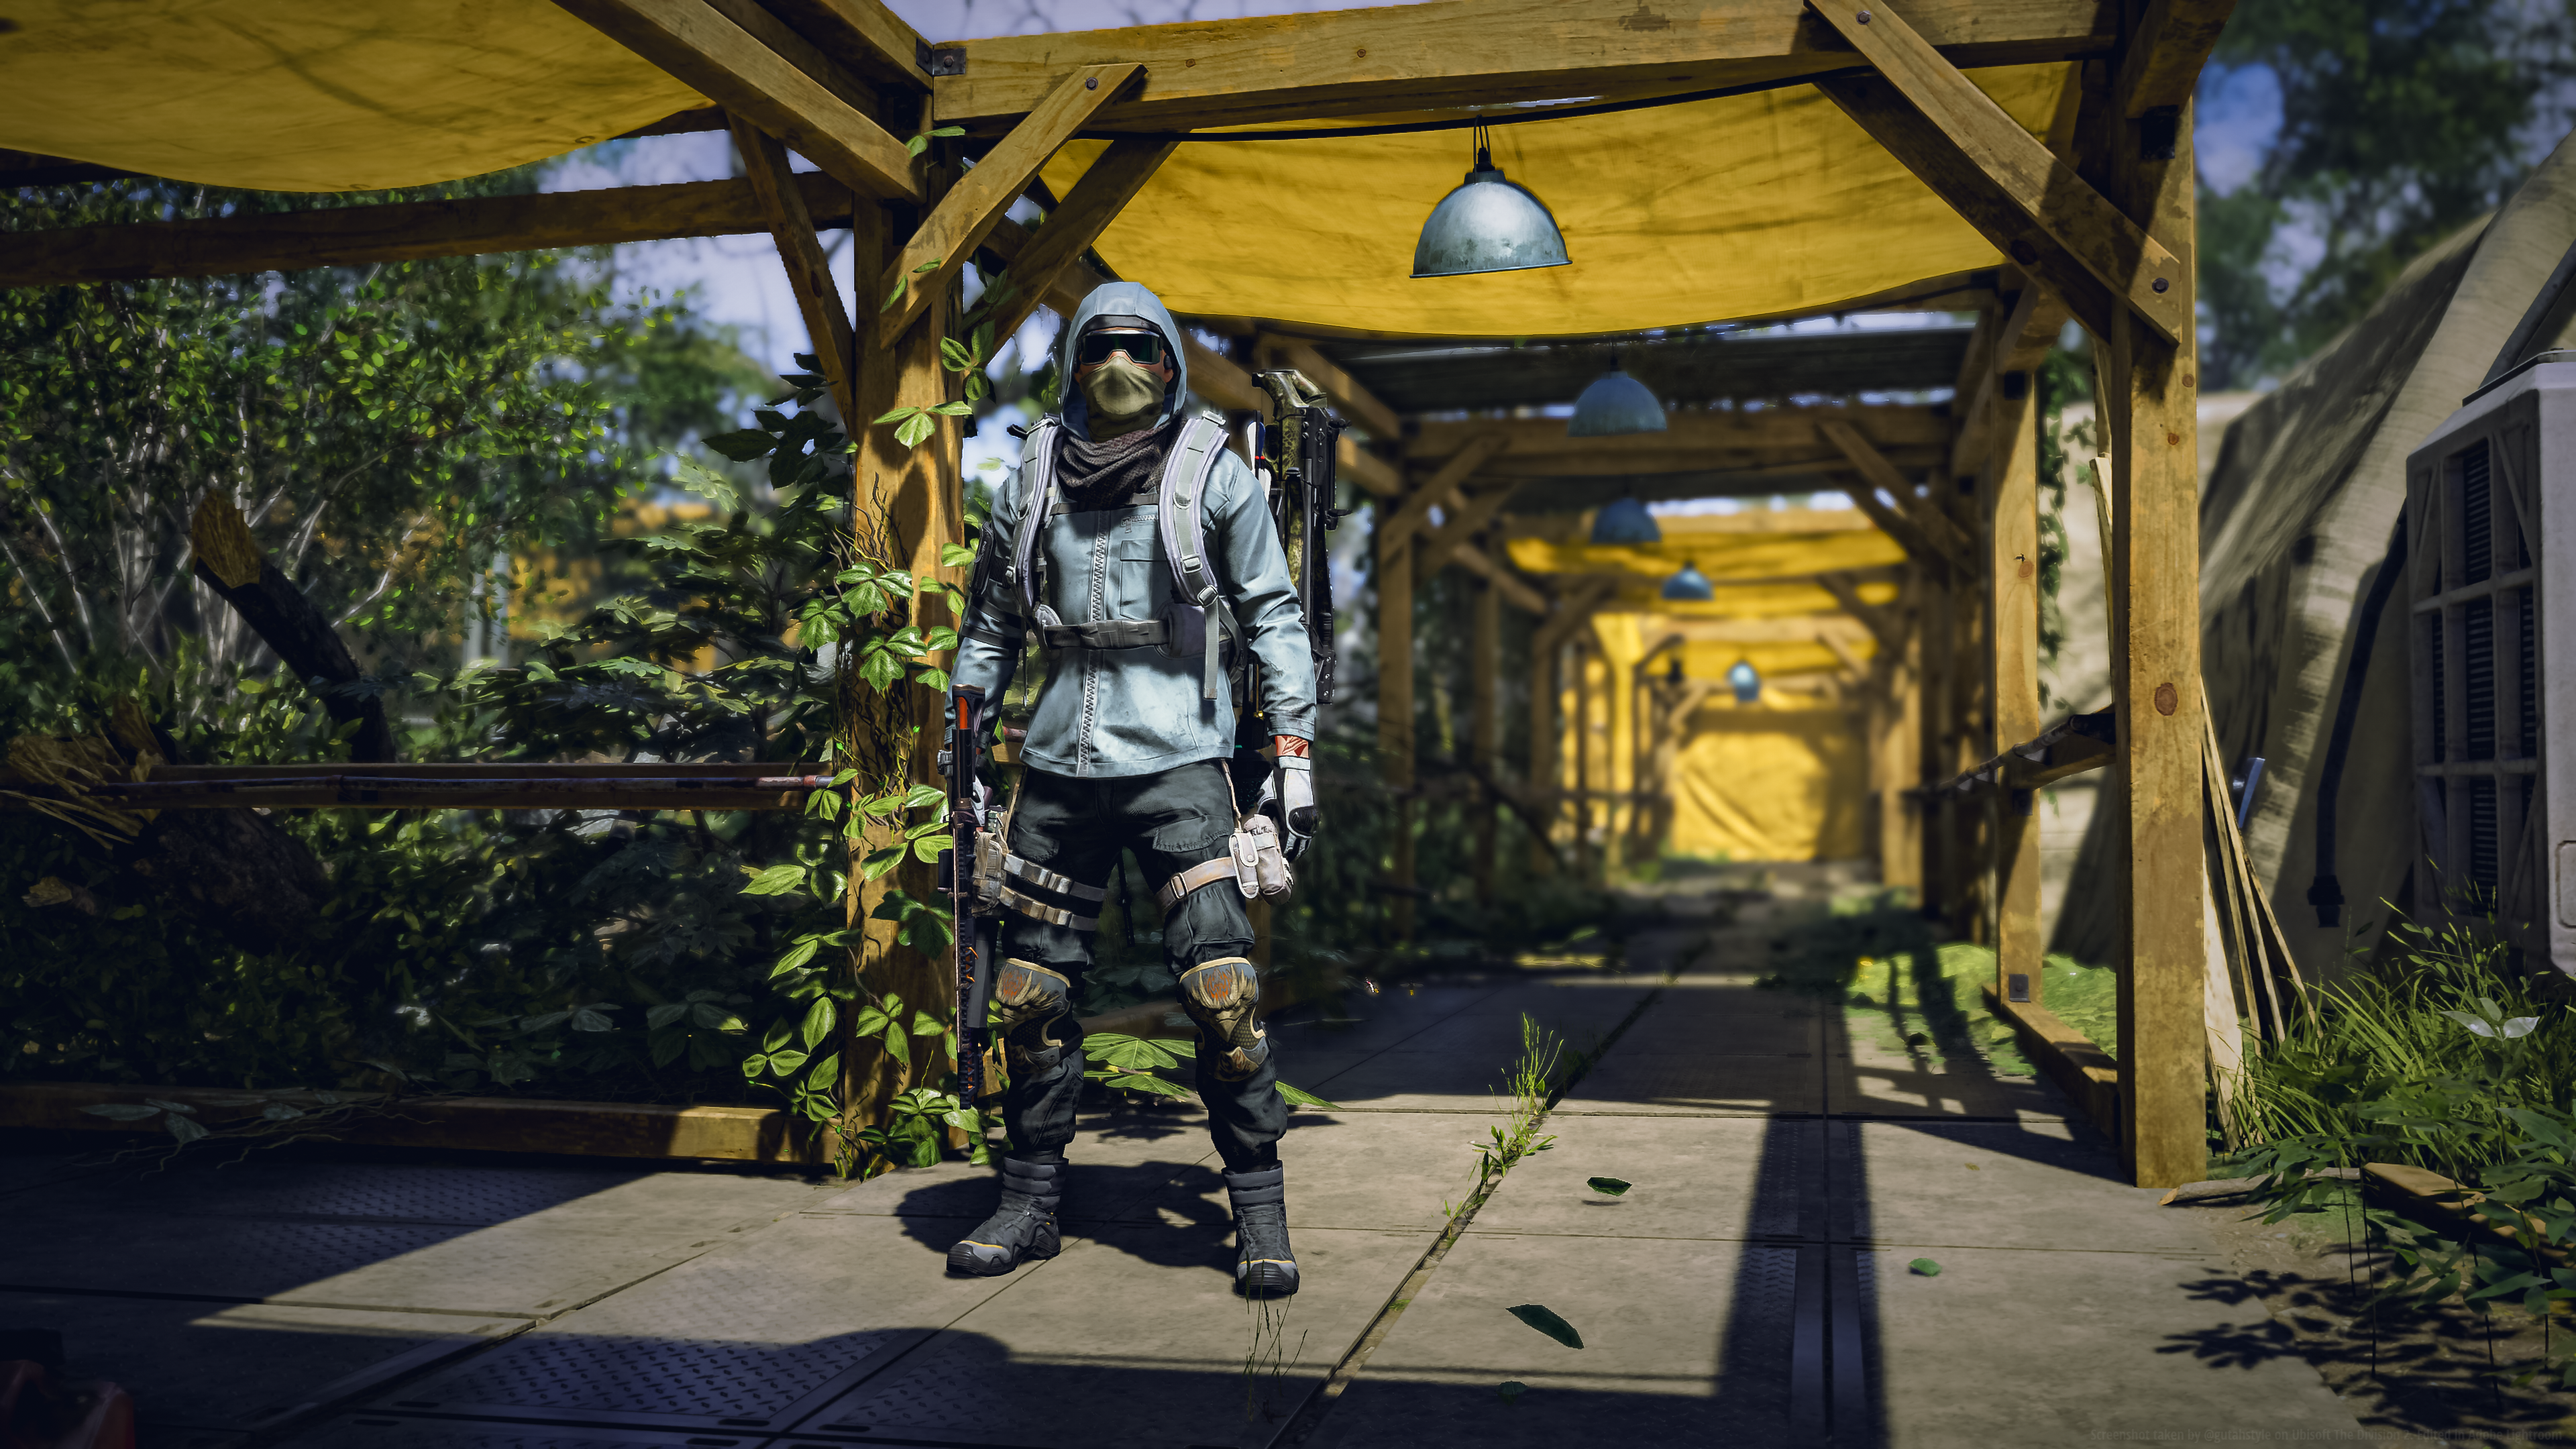 General 3840x2160 Tom Clancy's The Division 2 edit screen shot Game CG video games video game art sunlight video game characters CGI mask hoods leaves standing depth of field goggles boys with guns gun